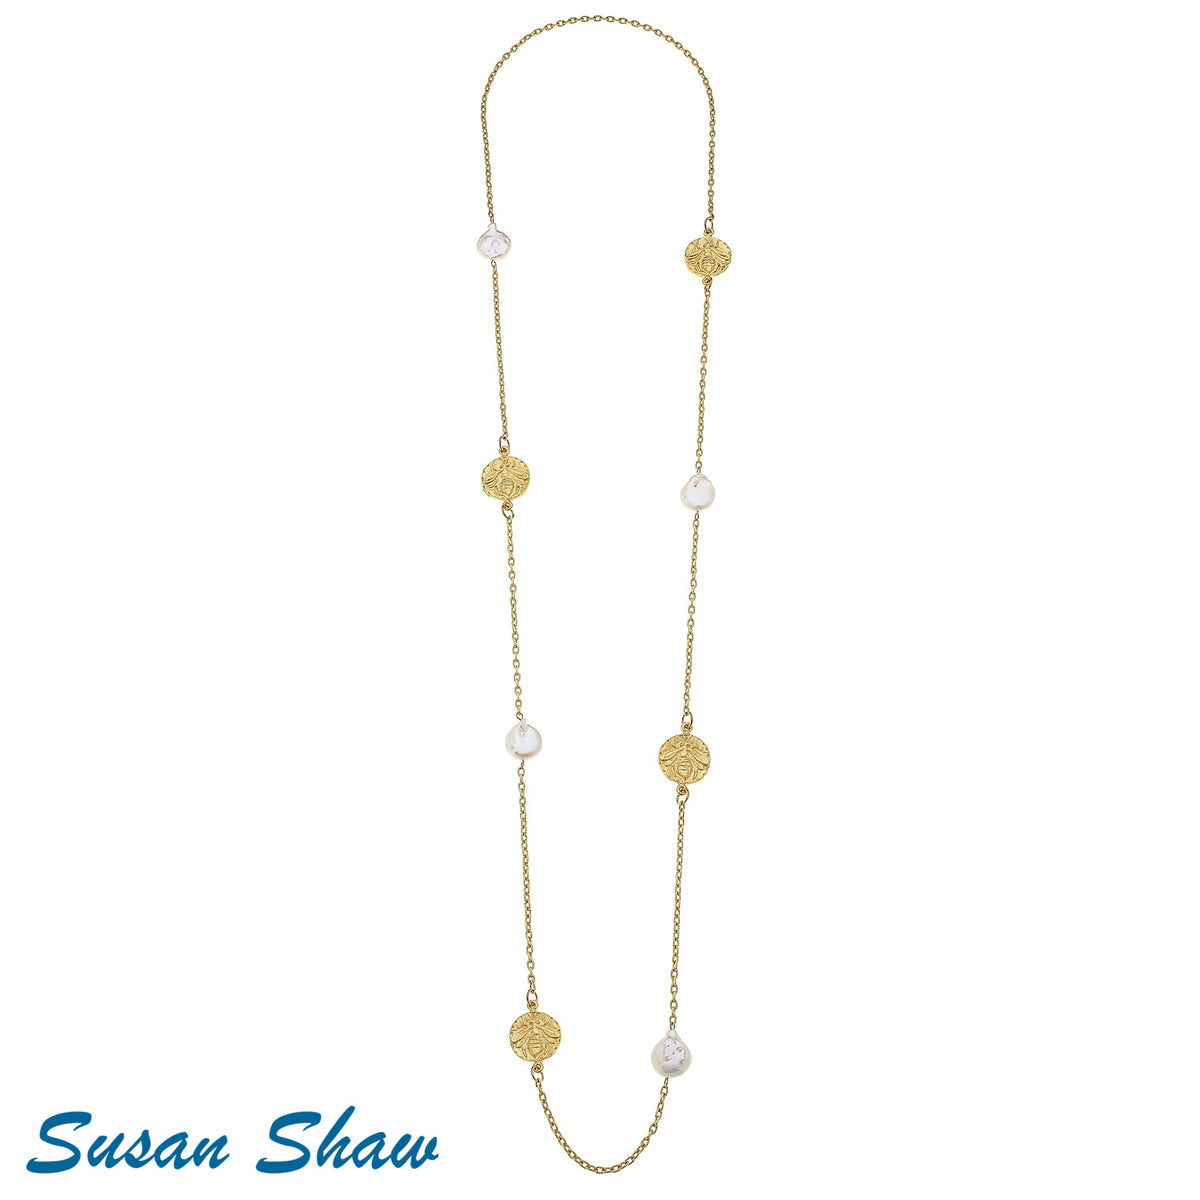 Susan Shaw BEE + PEARL LAYERING NECKLACE